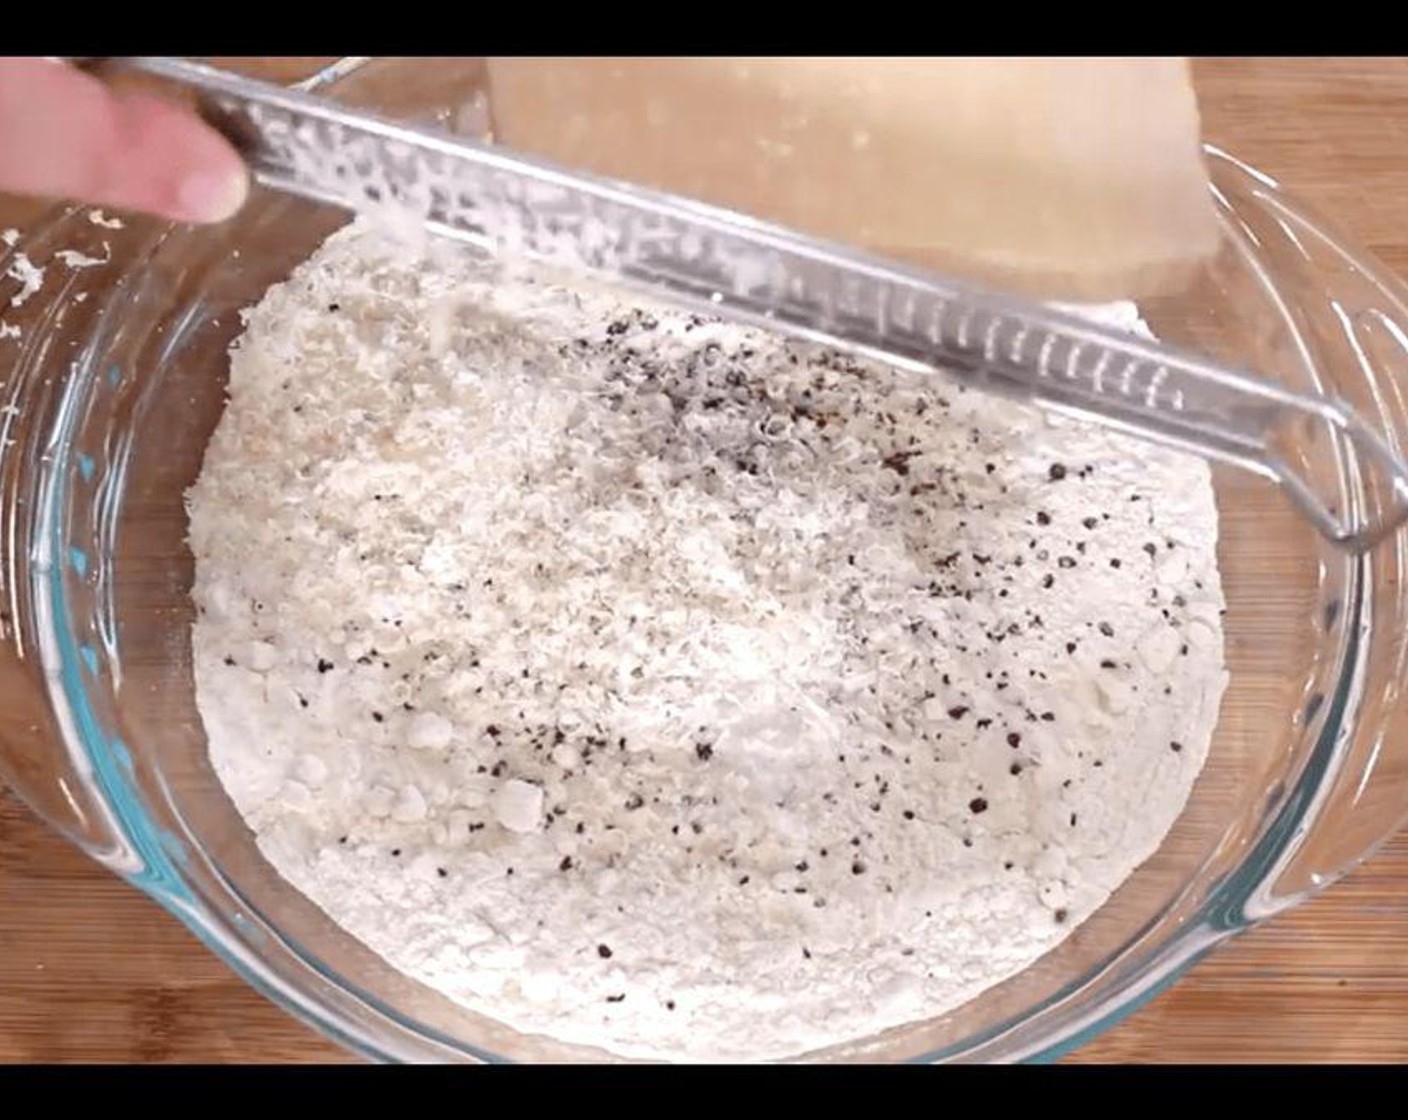 step 1 Mix together All-Purpose Flour (1/2 cup), Parmesan Cheese (3/4 cup), and Ground Black Pepper (1 tsp).